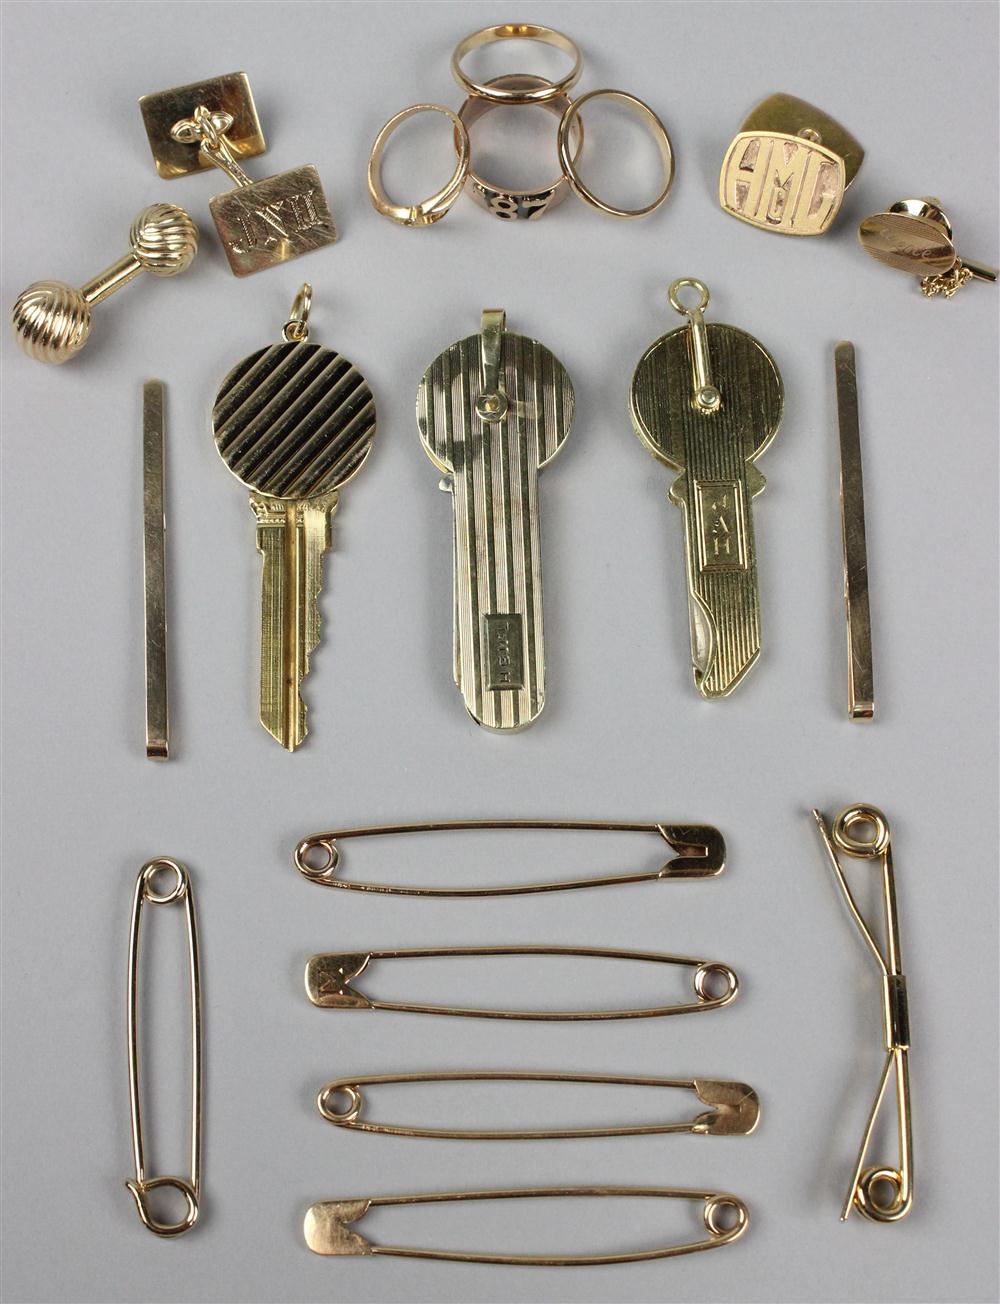 GROUP OF GENTLEMAN'S GOLD JEWELRY